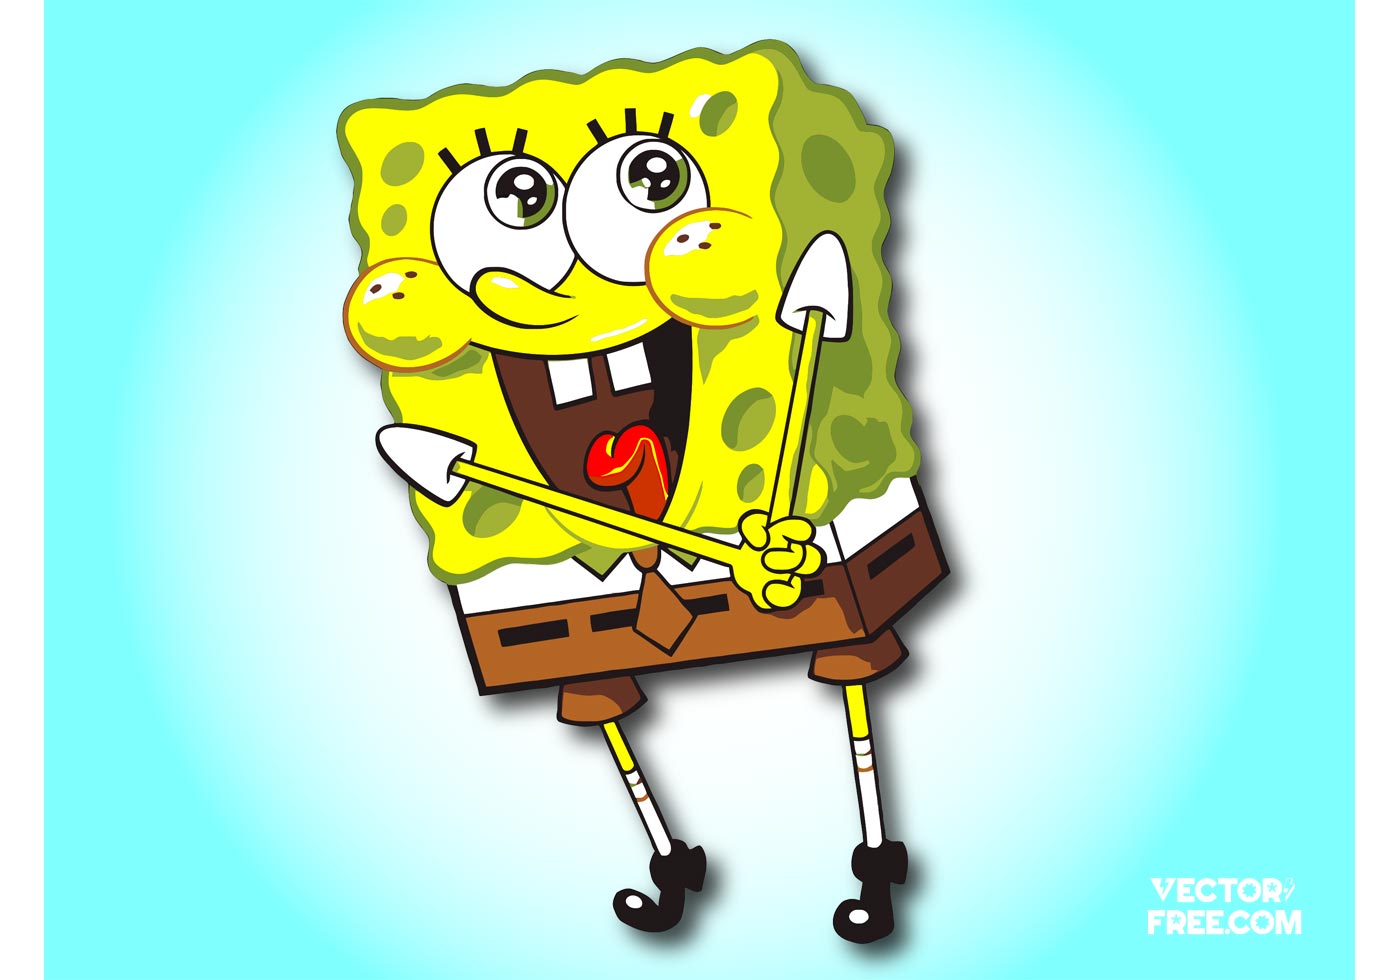 Spongebob Cartoon Vector Art, Icons, and Graphics for Free Download